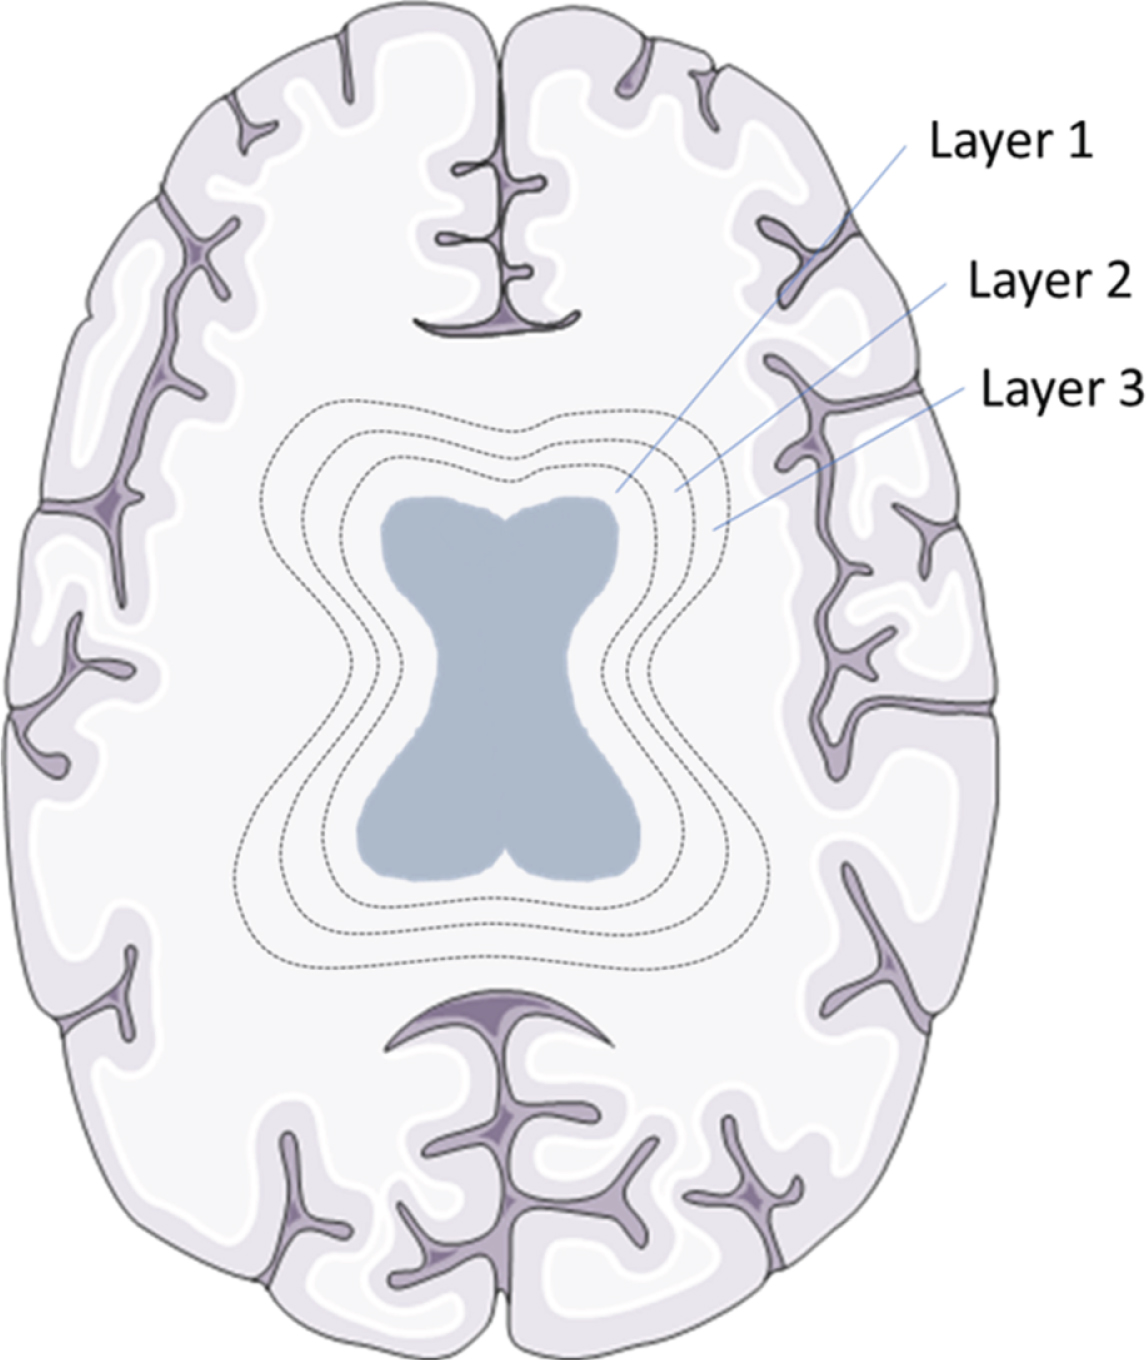 WMH layers in a schematic overview. Brain tissue was divided into 20 layers, from ventricles to the skull, with each layer accounting for 5% of the total distance between ventricles to the skull. To exemplify this division the first three circular layers around the ventricles are shown in this schematic picture. Brain section image was modified from Smart Servier Medical Art, https://smart.servier.com.